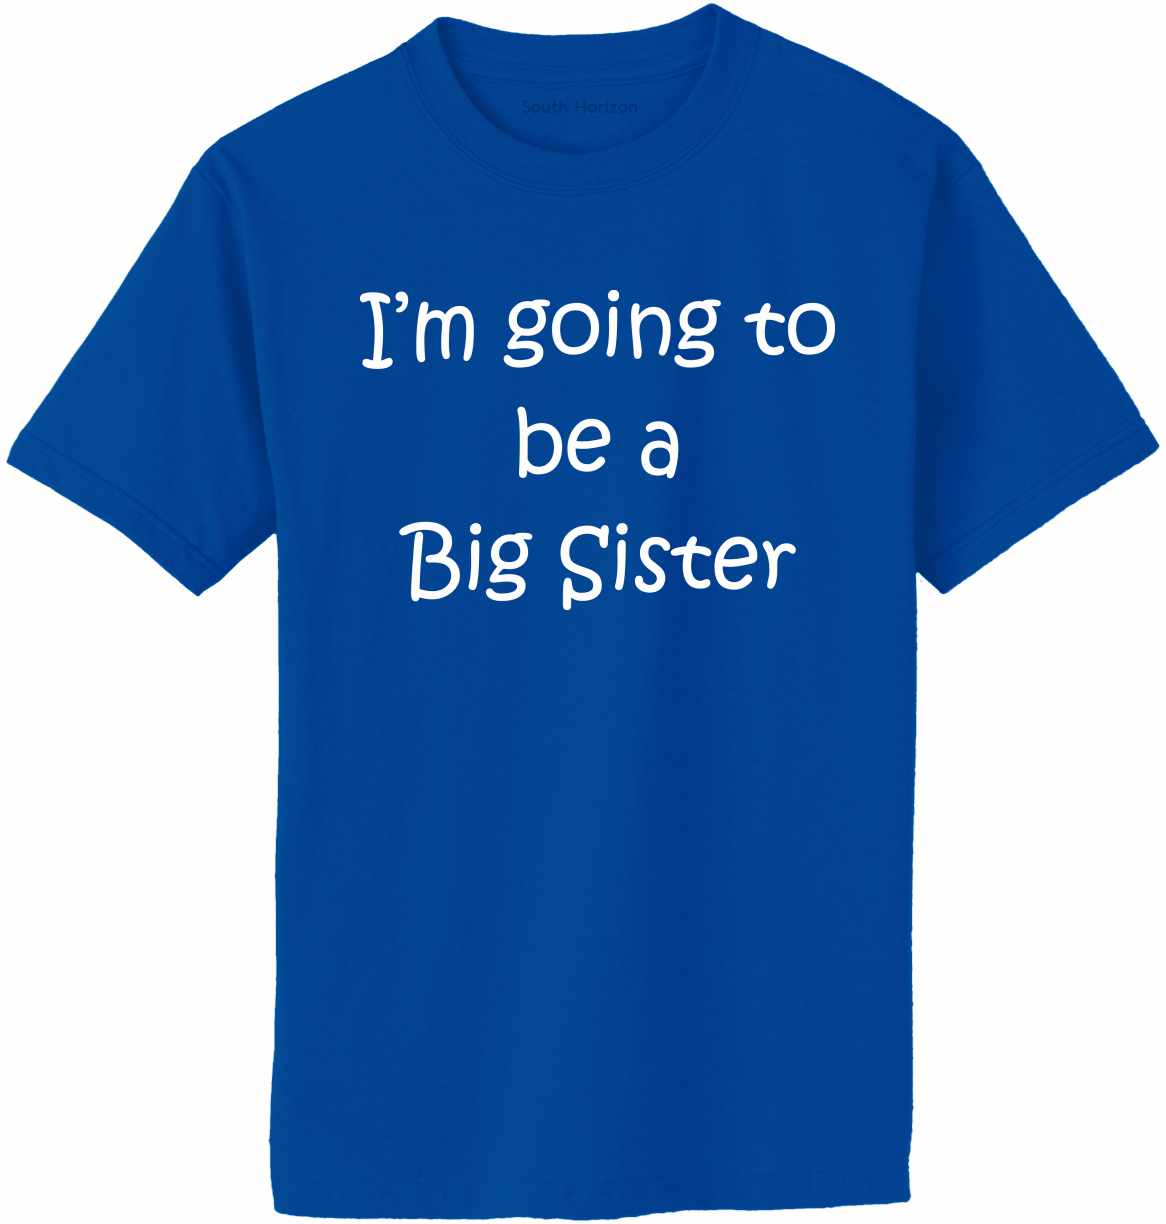 I'M GOING TO BE A BIG SISTER Adult T-Shirt (#587-1)